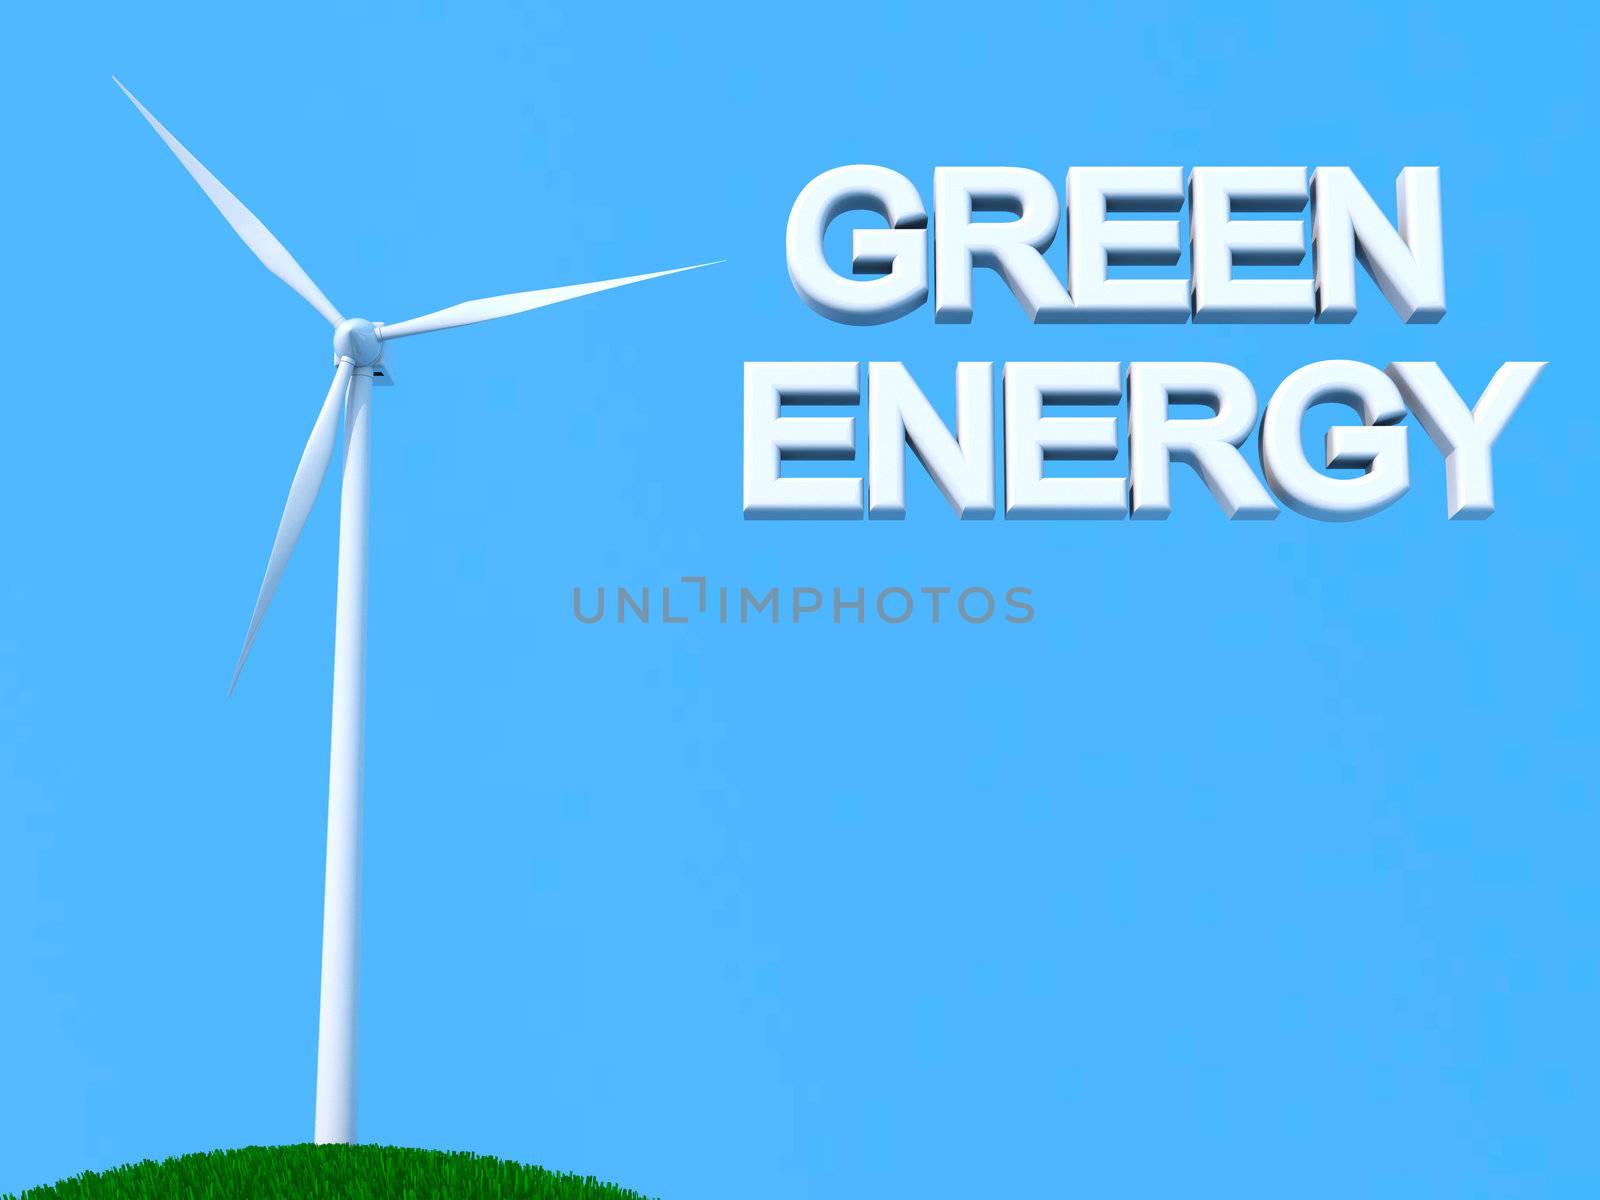 Wind turbine with "green energy" sign on blue skies